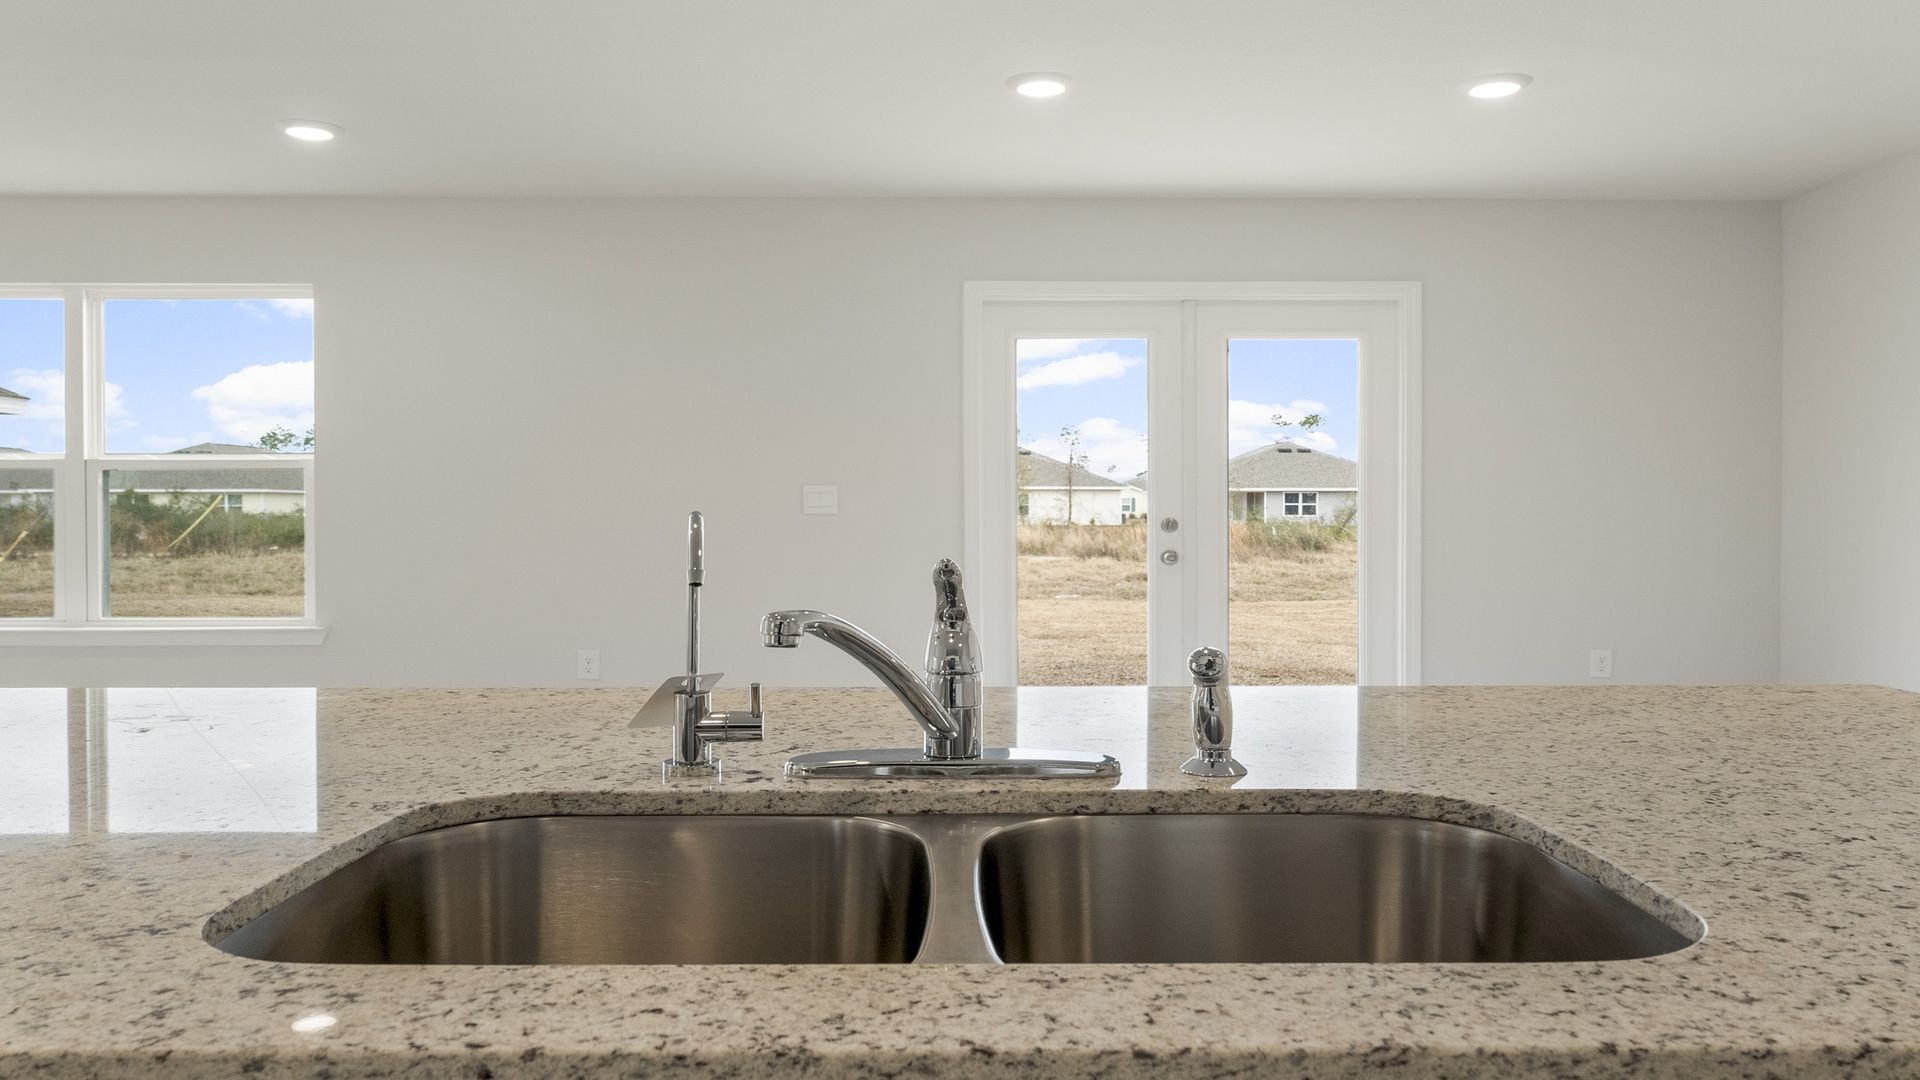 Kitchen island with granite countertops and undermount sink looking into dining area and back door.